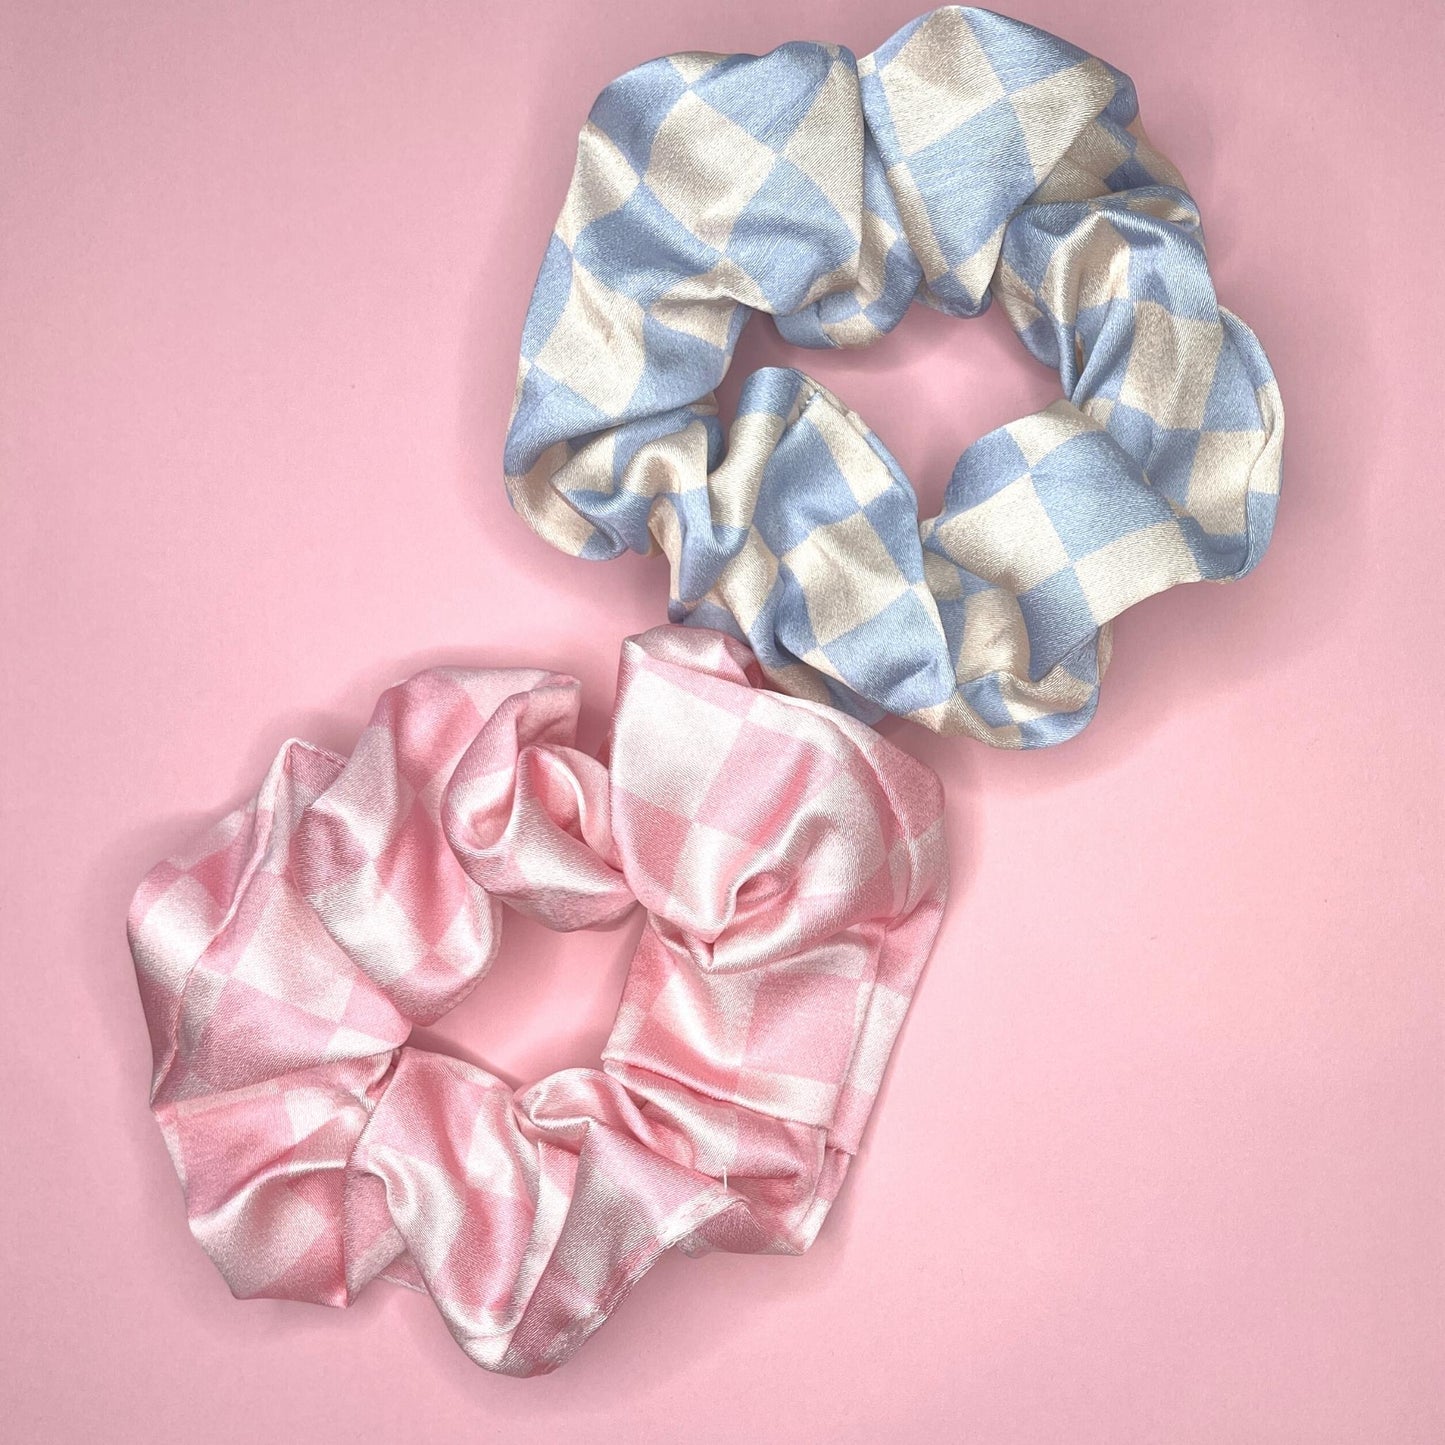 checkerboard scrunchies in pink and blue.